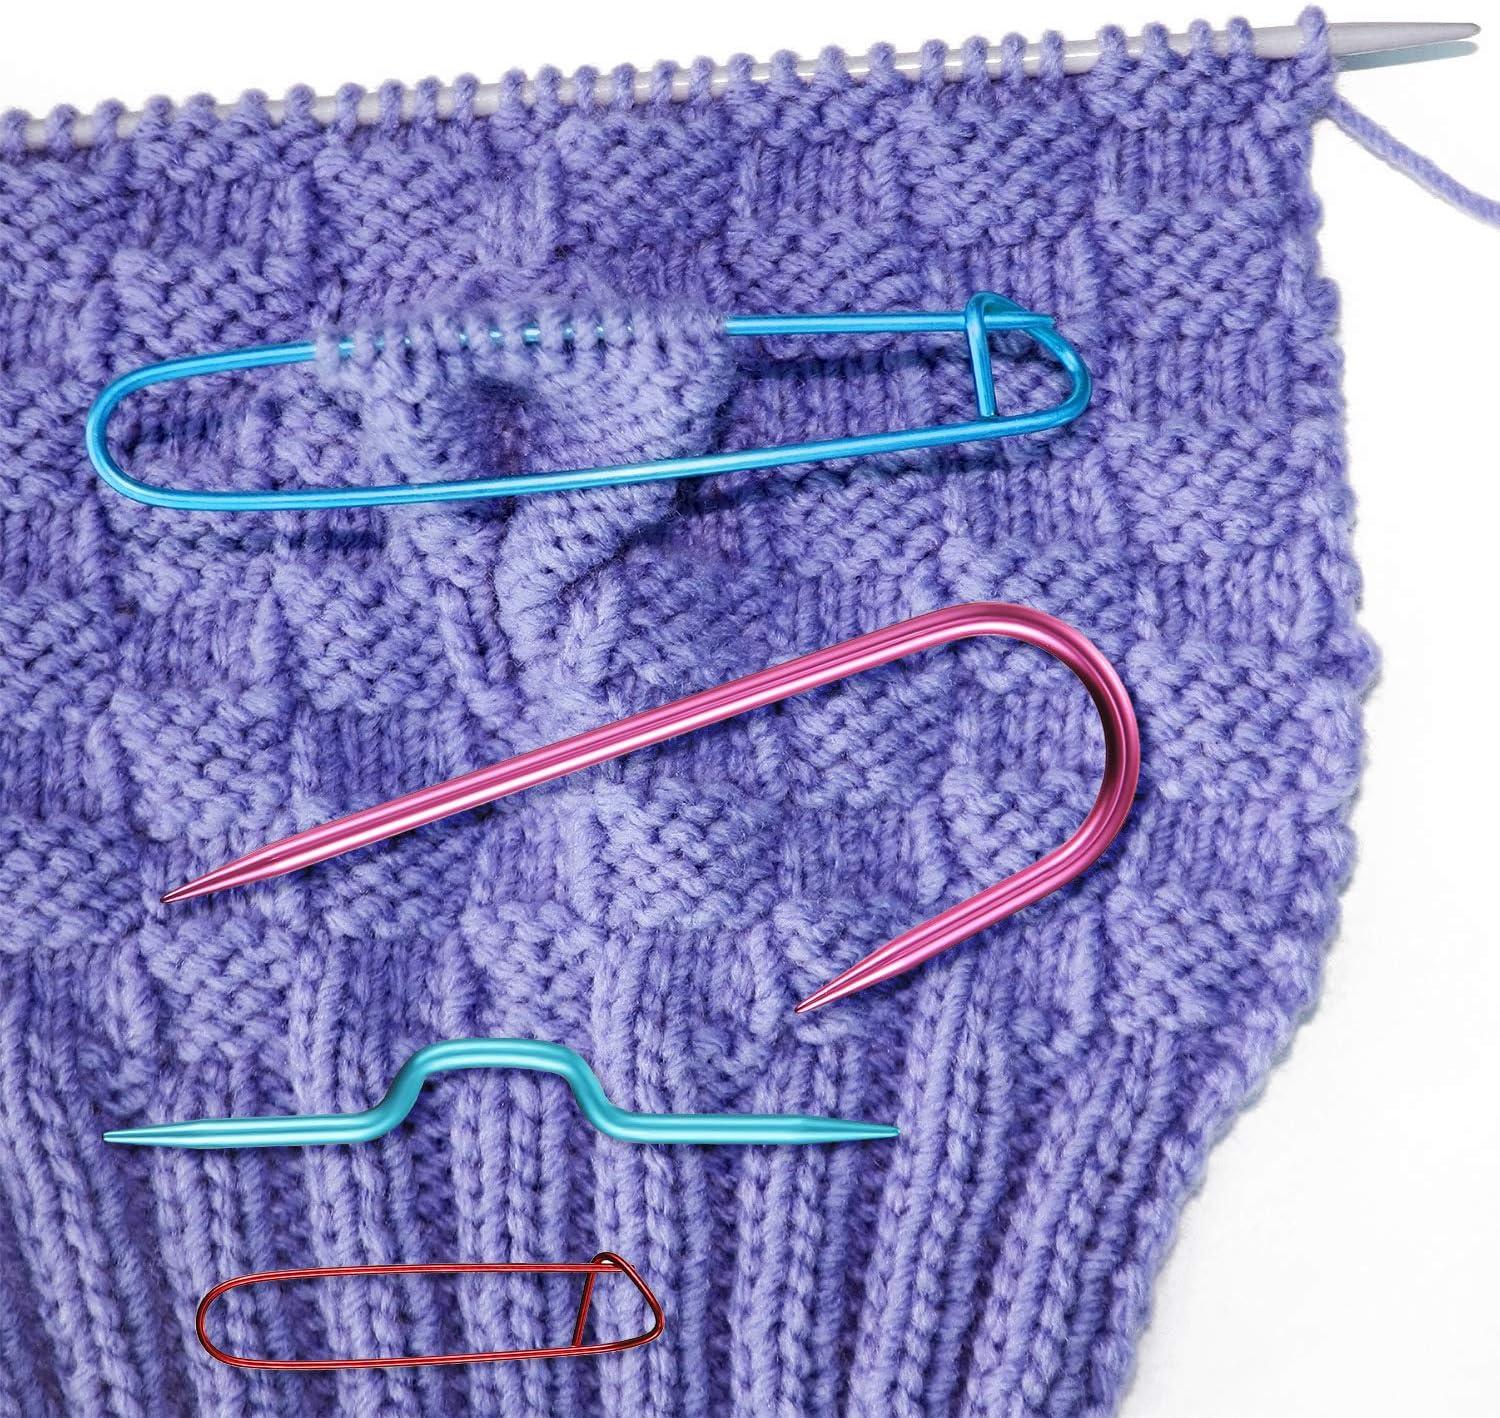 12 Pieces Multicolor Knitting Stitch Holders Yarn Stitch Holder for  Knitting Notions Crochet Needle Aluminum Stitch Holders Safety Pins, 6 Sizes